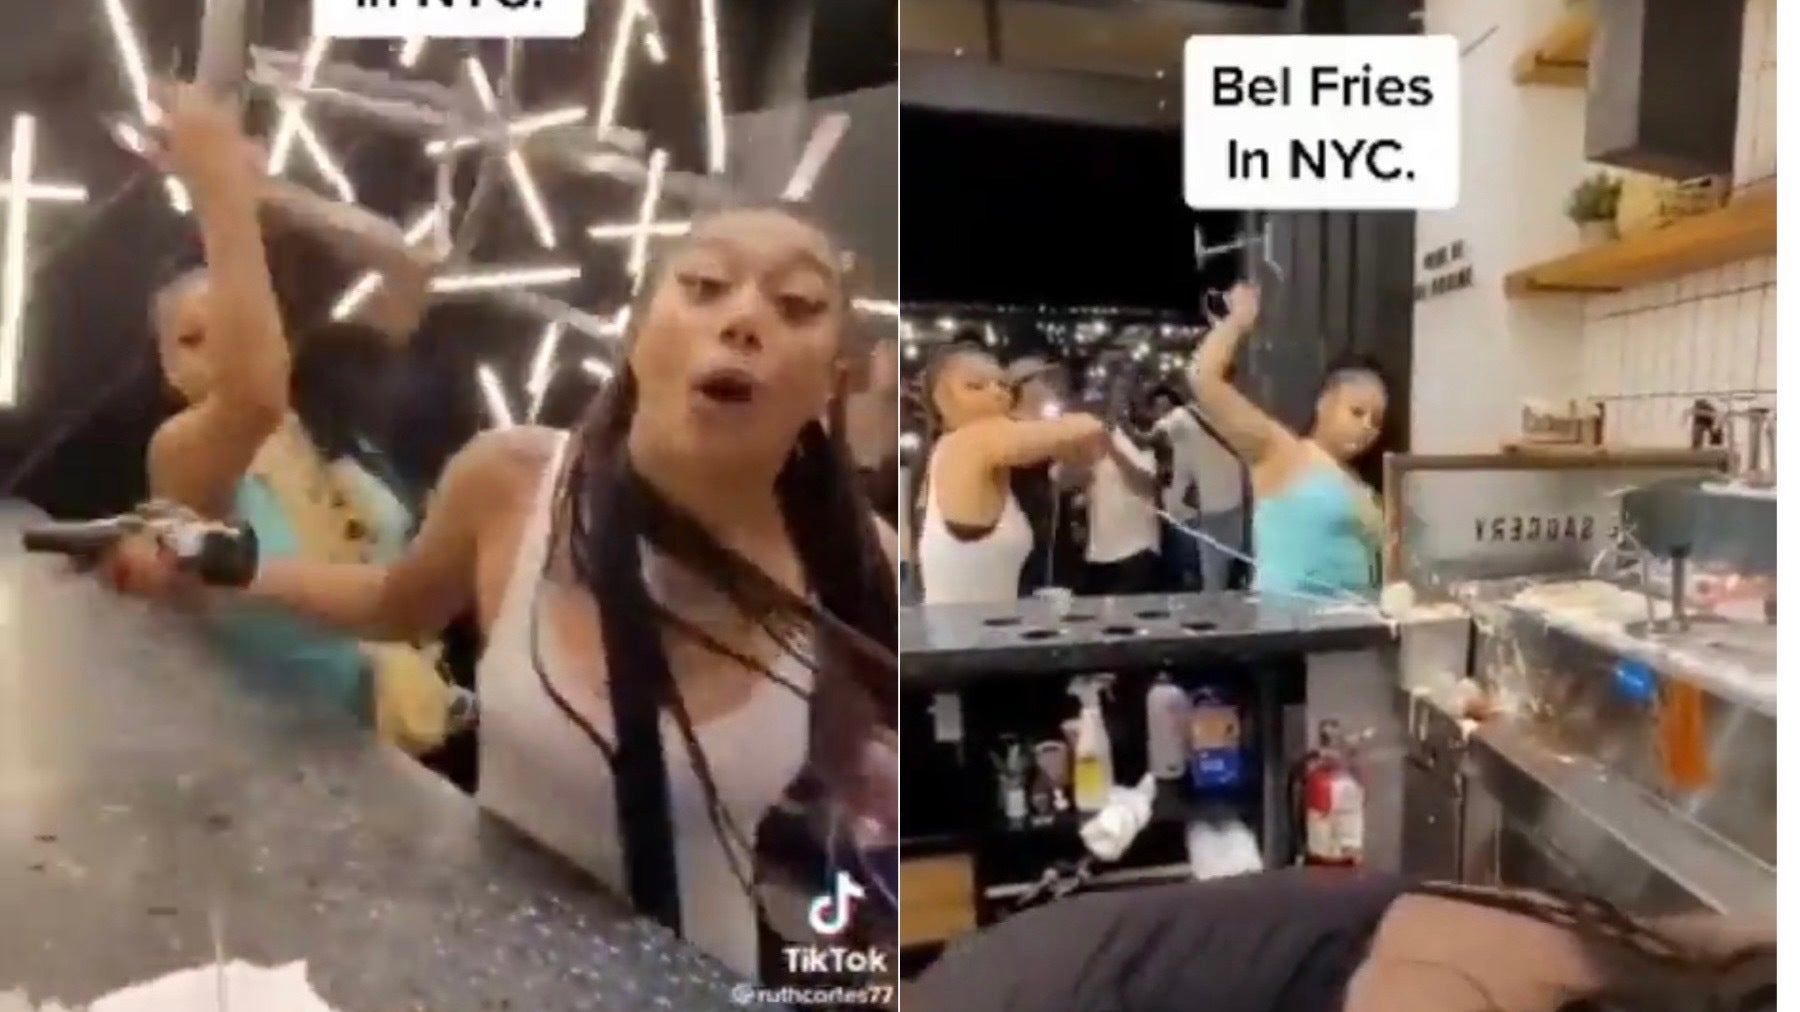 NYC women attacked fast food employees over dipping sauce fee in viral video: police